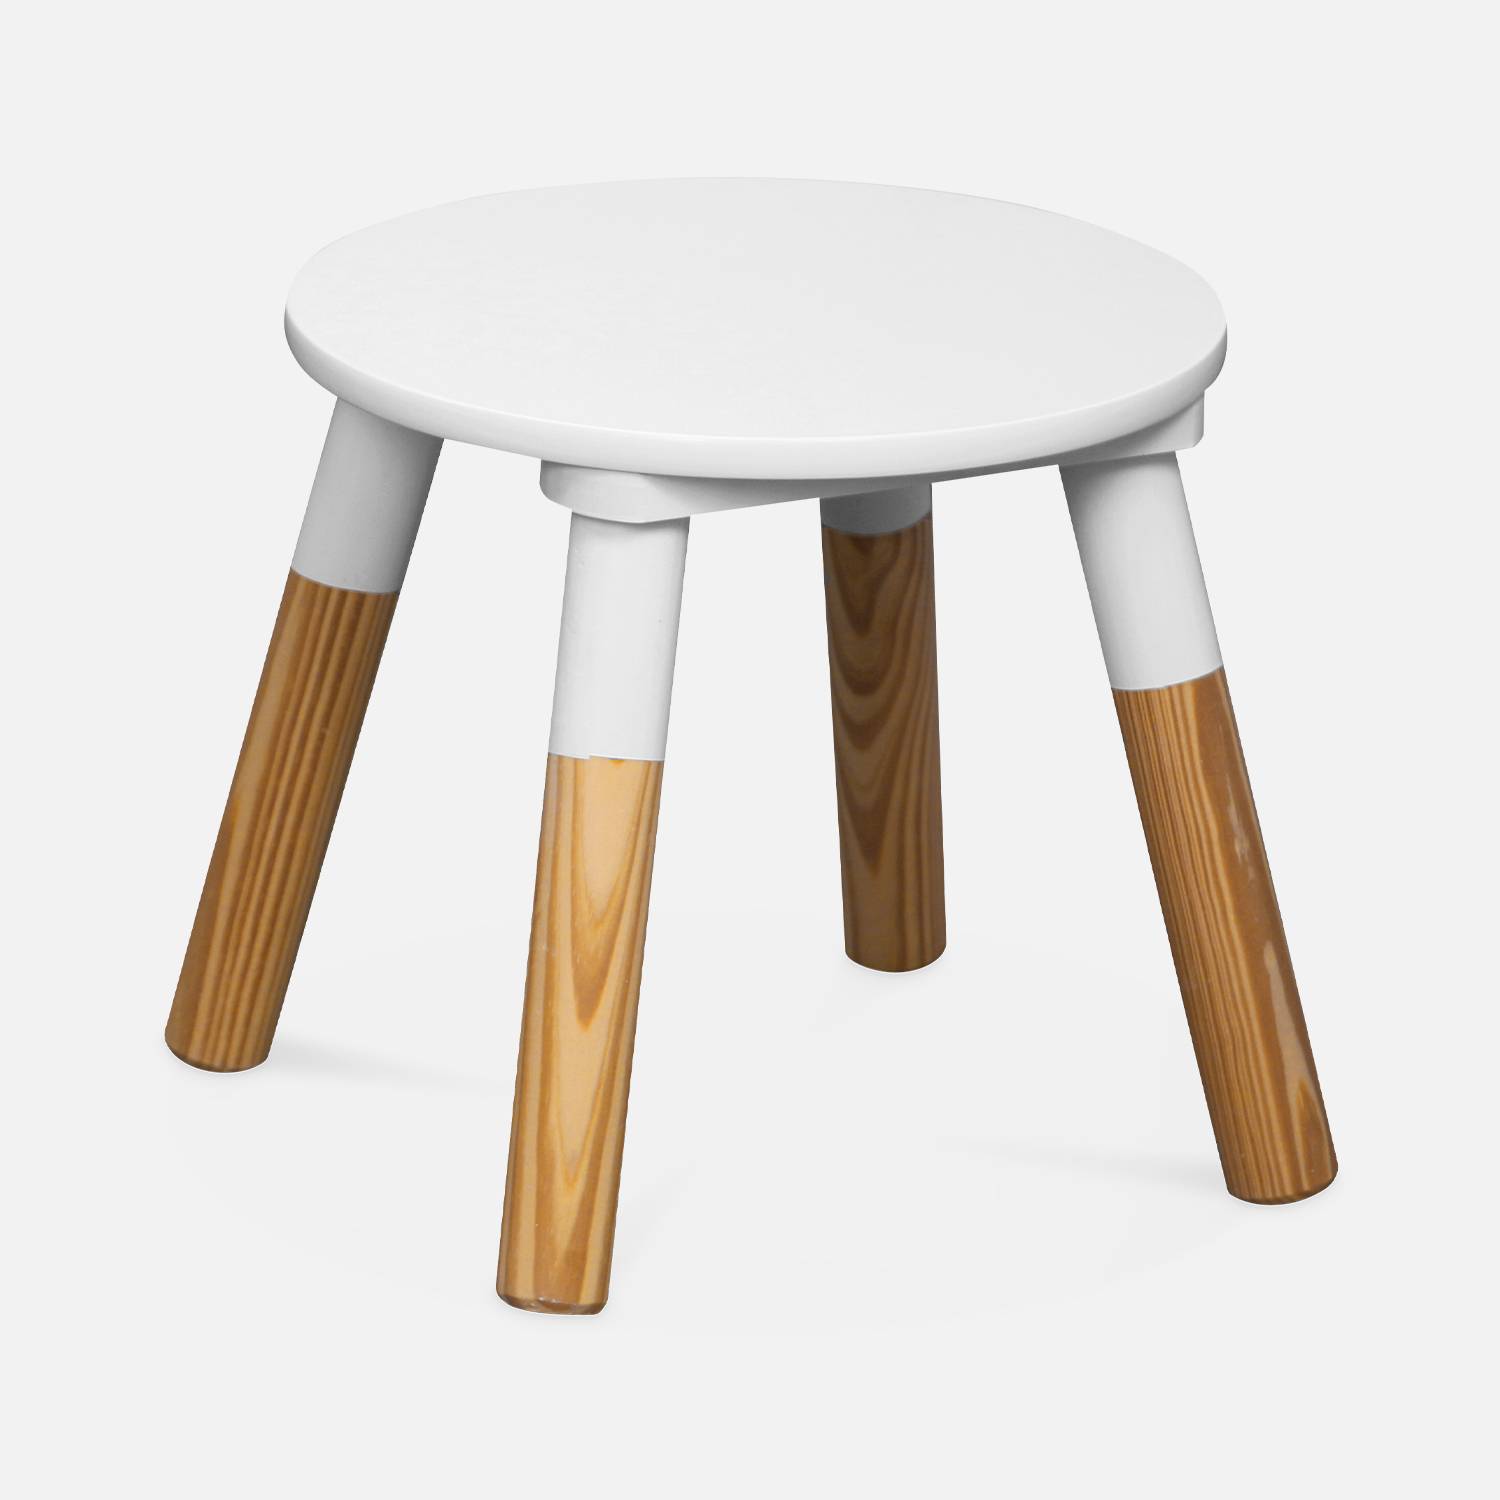 Children's round table with two stools, 55x55x43cm - Tobias - natural pine, painted White Photo6